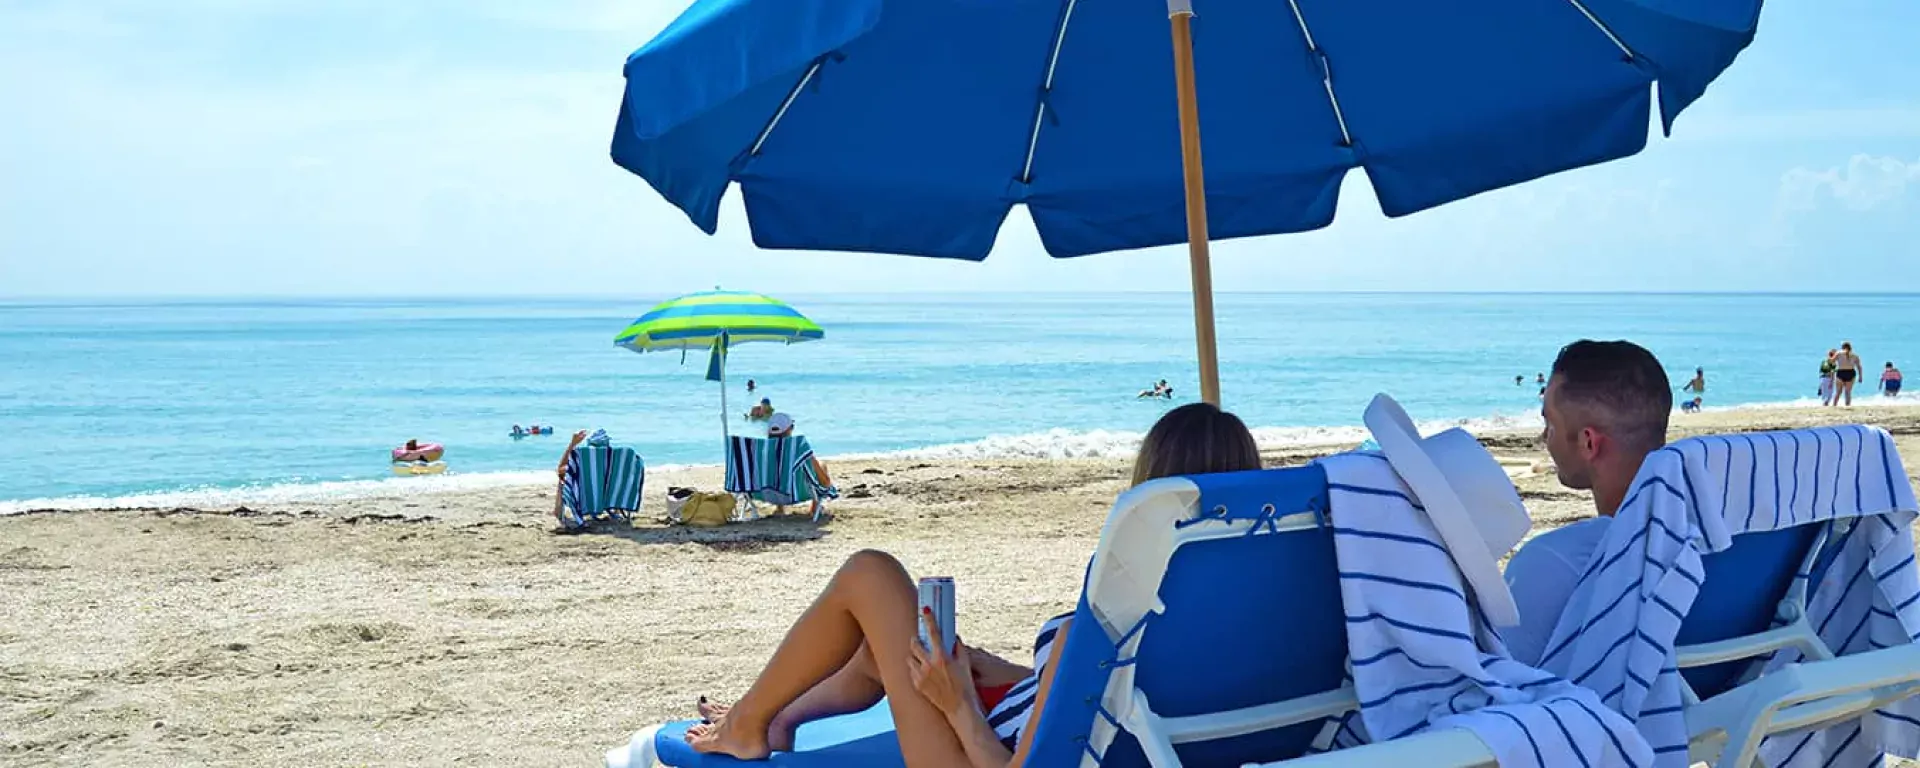 Image of two guests enjoying the rentable beach chairs and umbrellas available at Sand Dune Café in Jensen Beach, FL. 